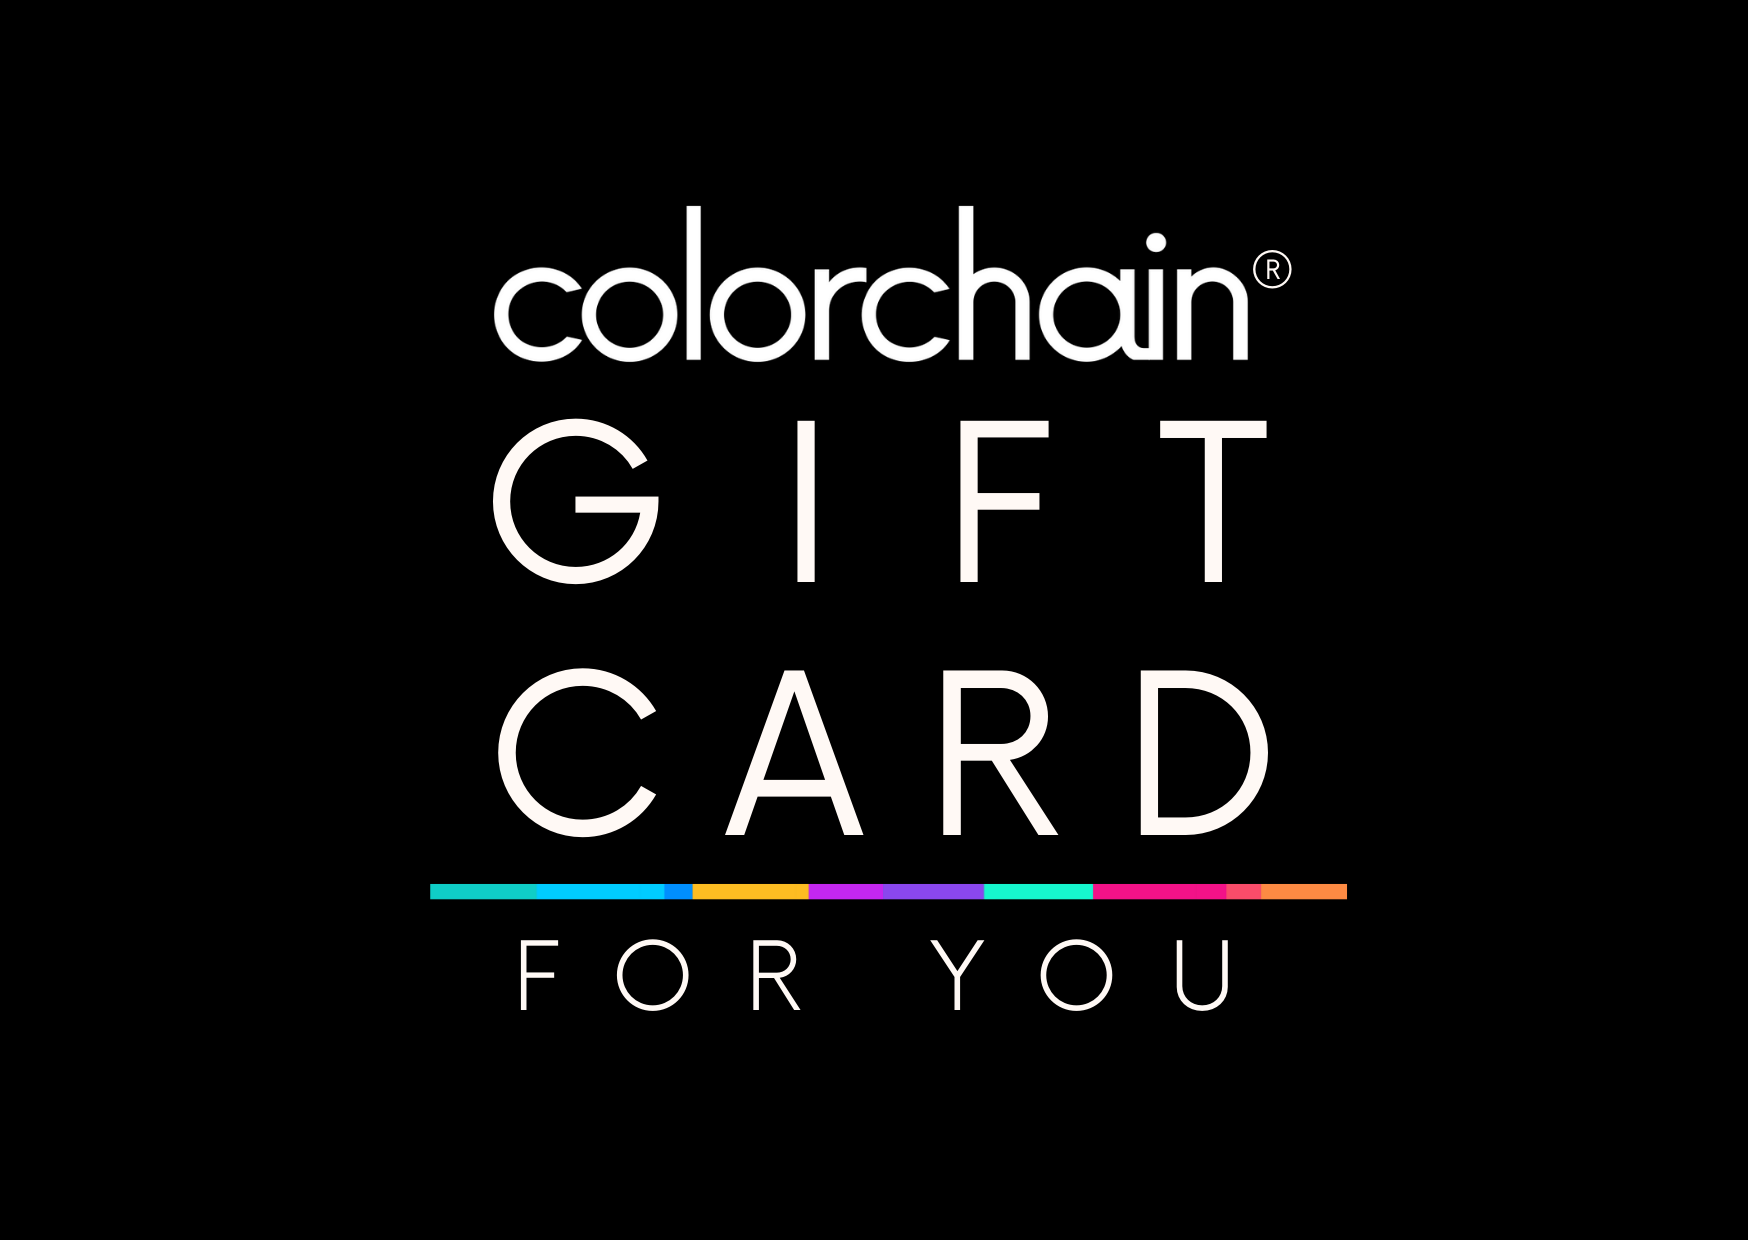 Colorchain Gift Card